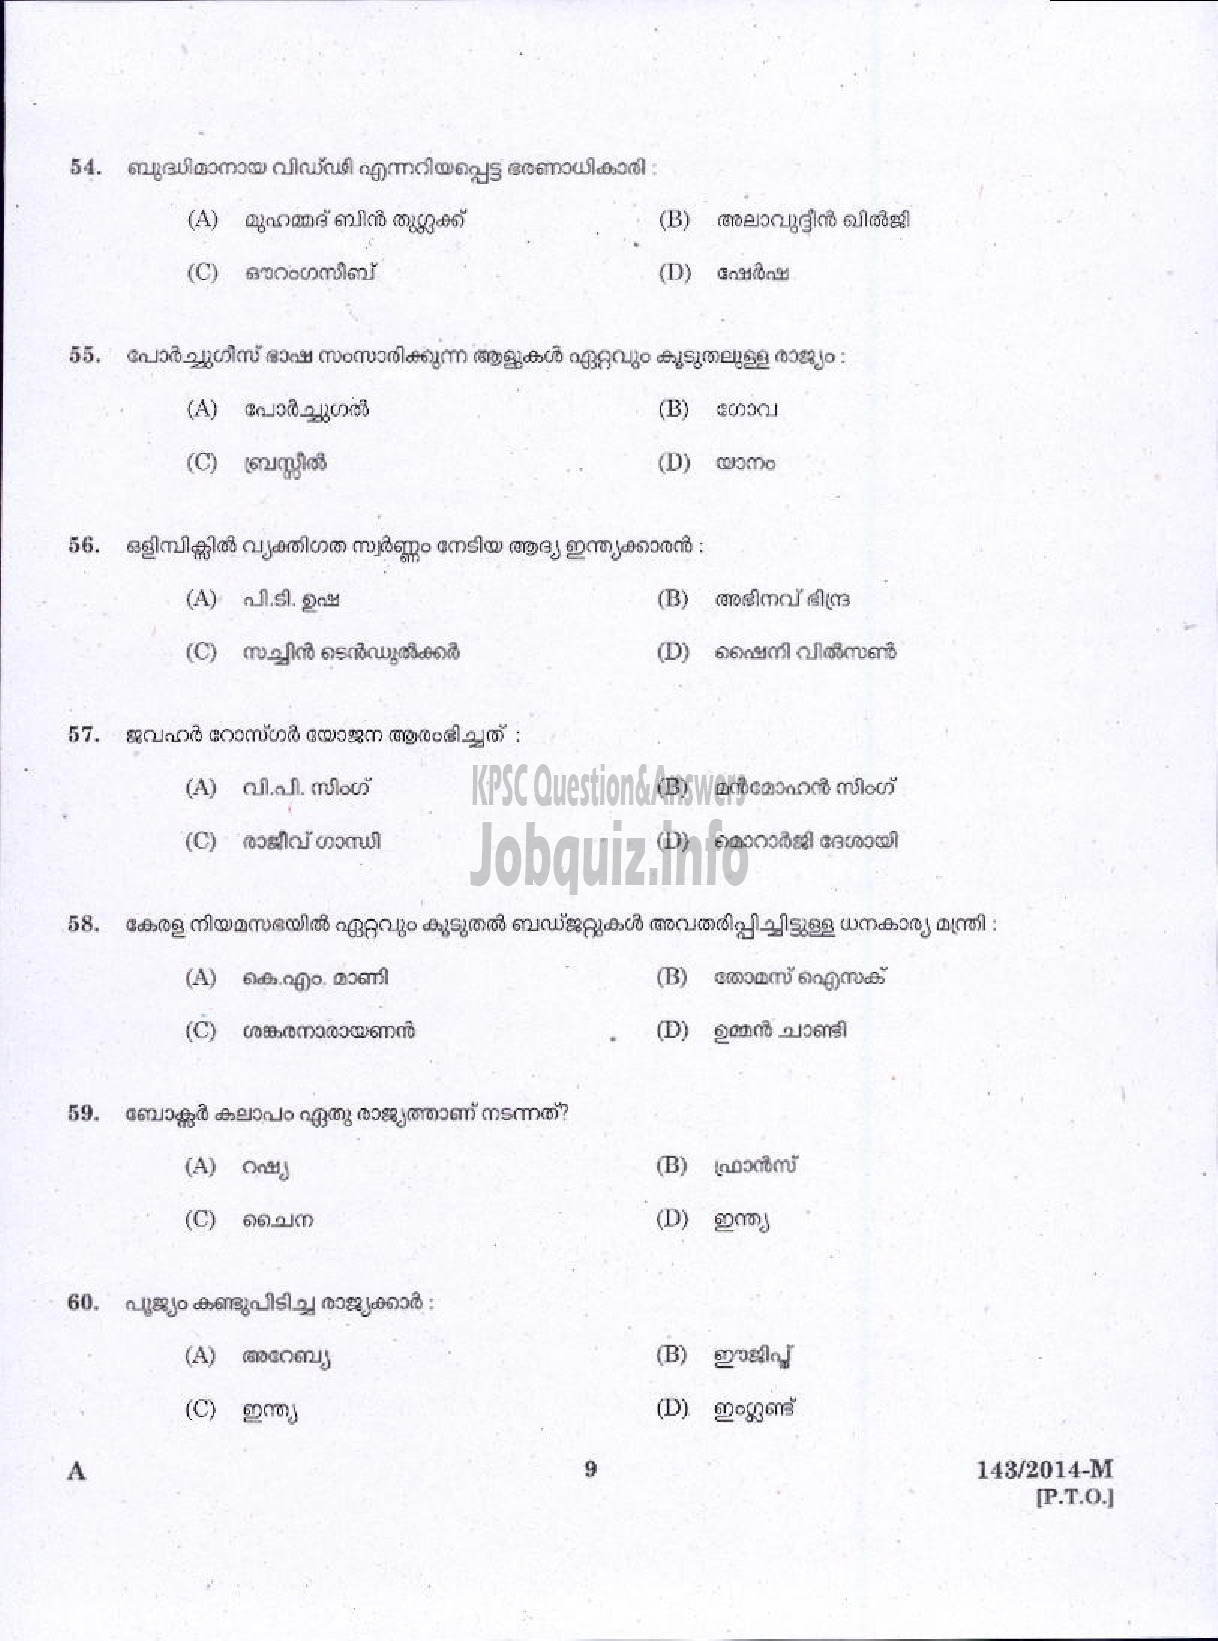 Kerala PSC Question Paper - WOMEN POLICE CONSTABLE APB POLICE MALE WARDER JAIL TSR AND KNR UNIT ( Malayalam ) -7